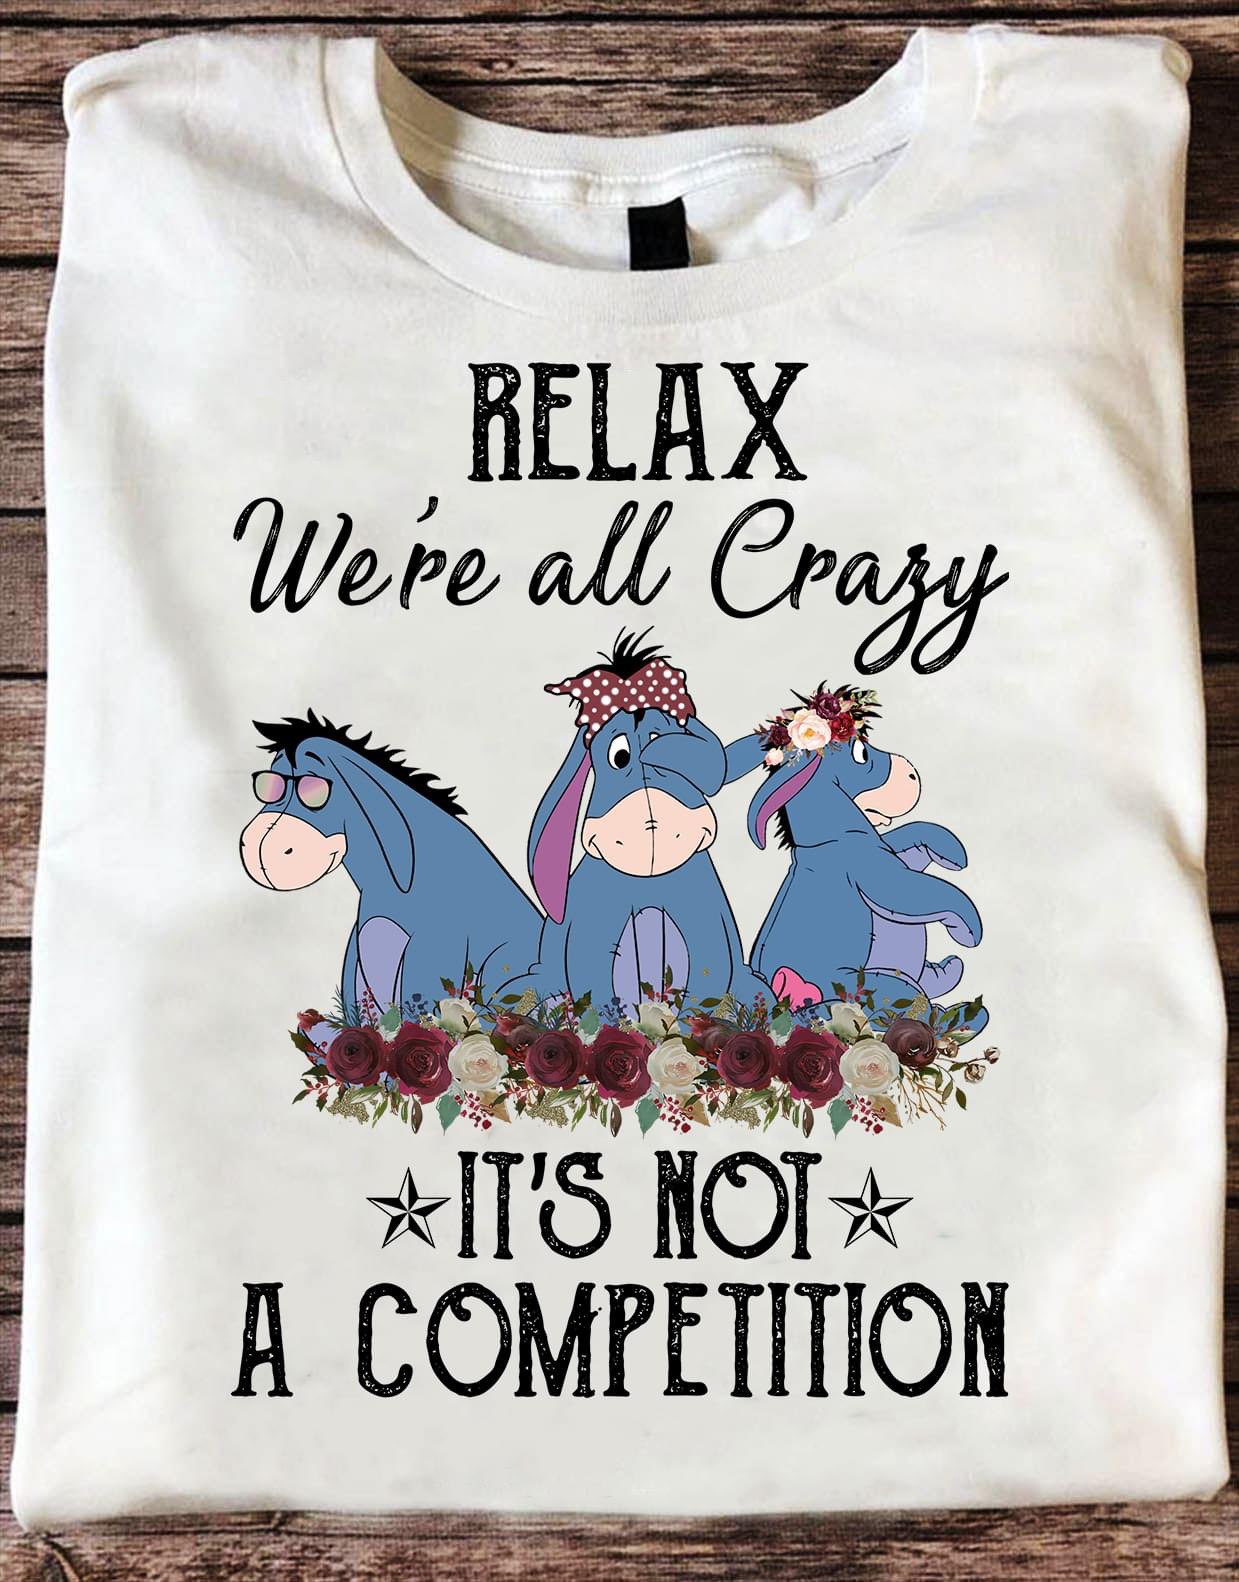 Relax We’re all Crazy